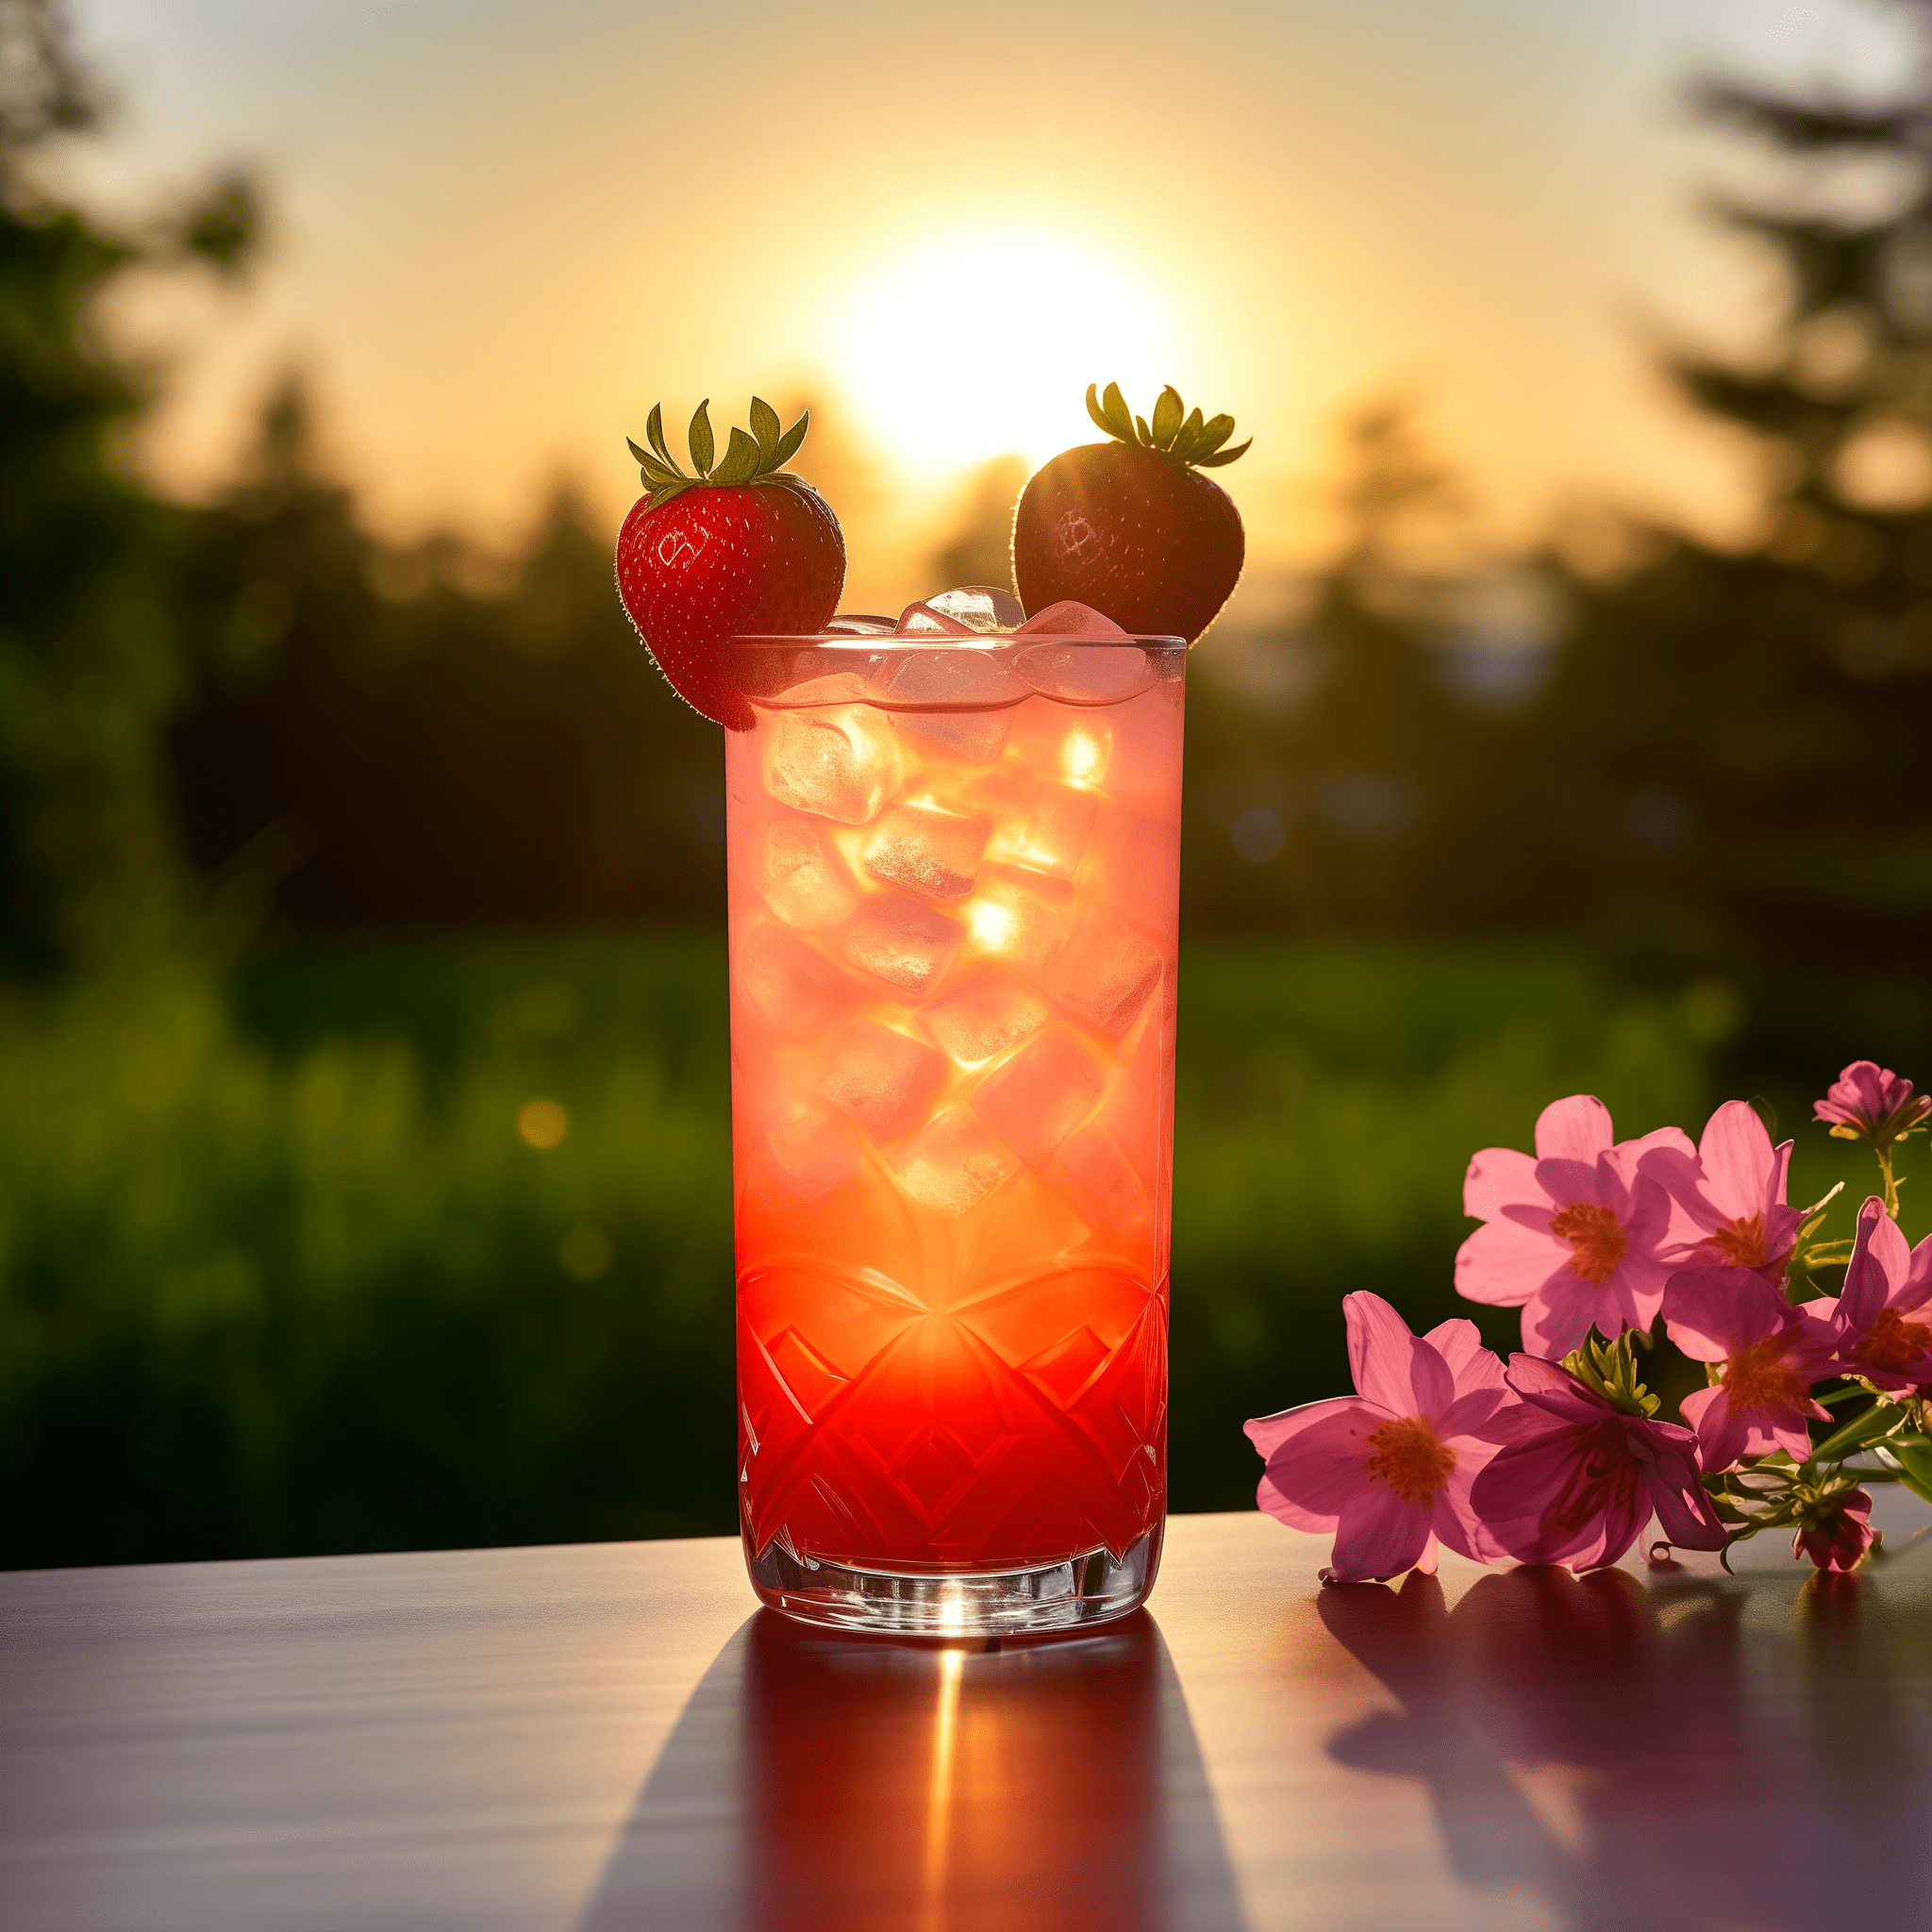 Drunk Bunny Cocktail Recipe - The Drunk Bunny offers a sweet and tangy profile, with the strawberry lemonade providing a fruity punch and the Malibu Rum adding a smooth, coconutty backdrop. It's a light and refreshing cocktail with a playful kick.